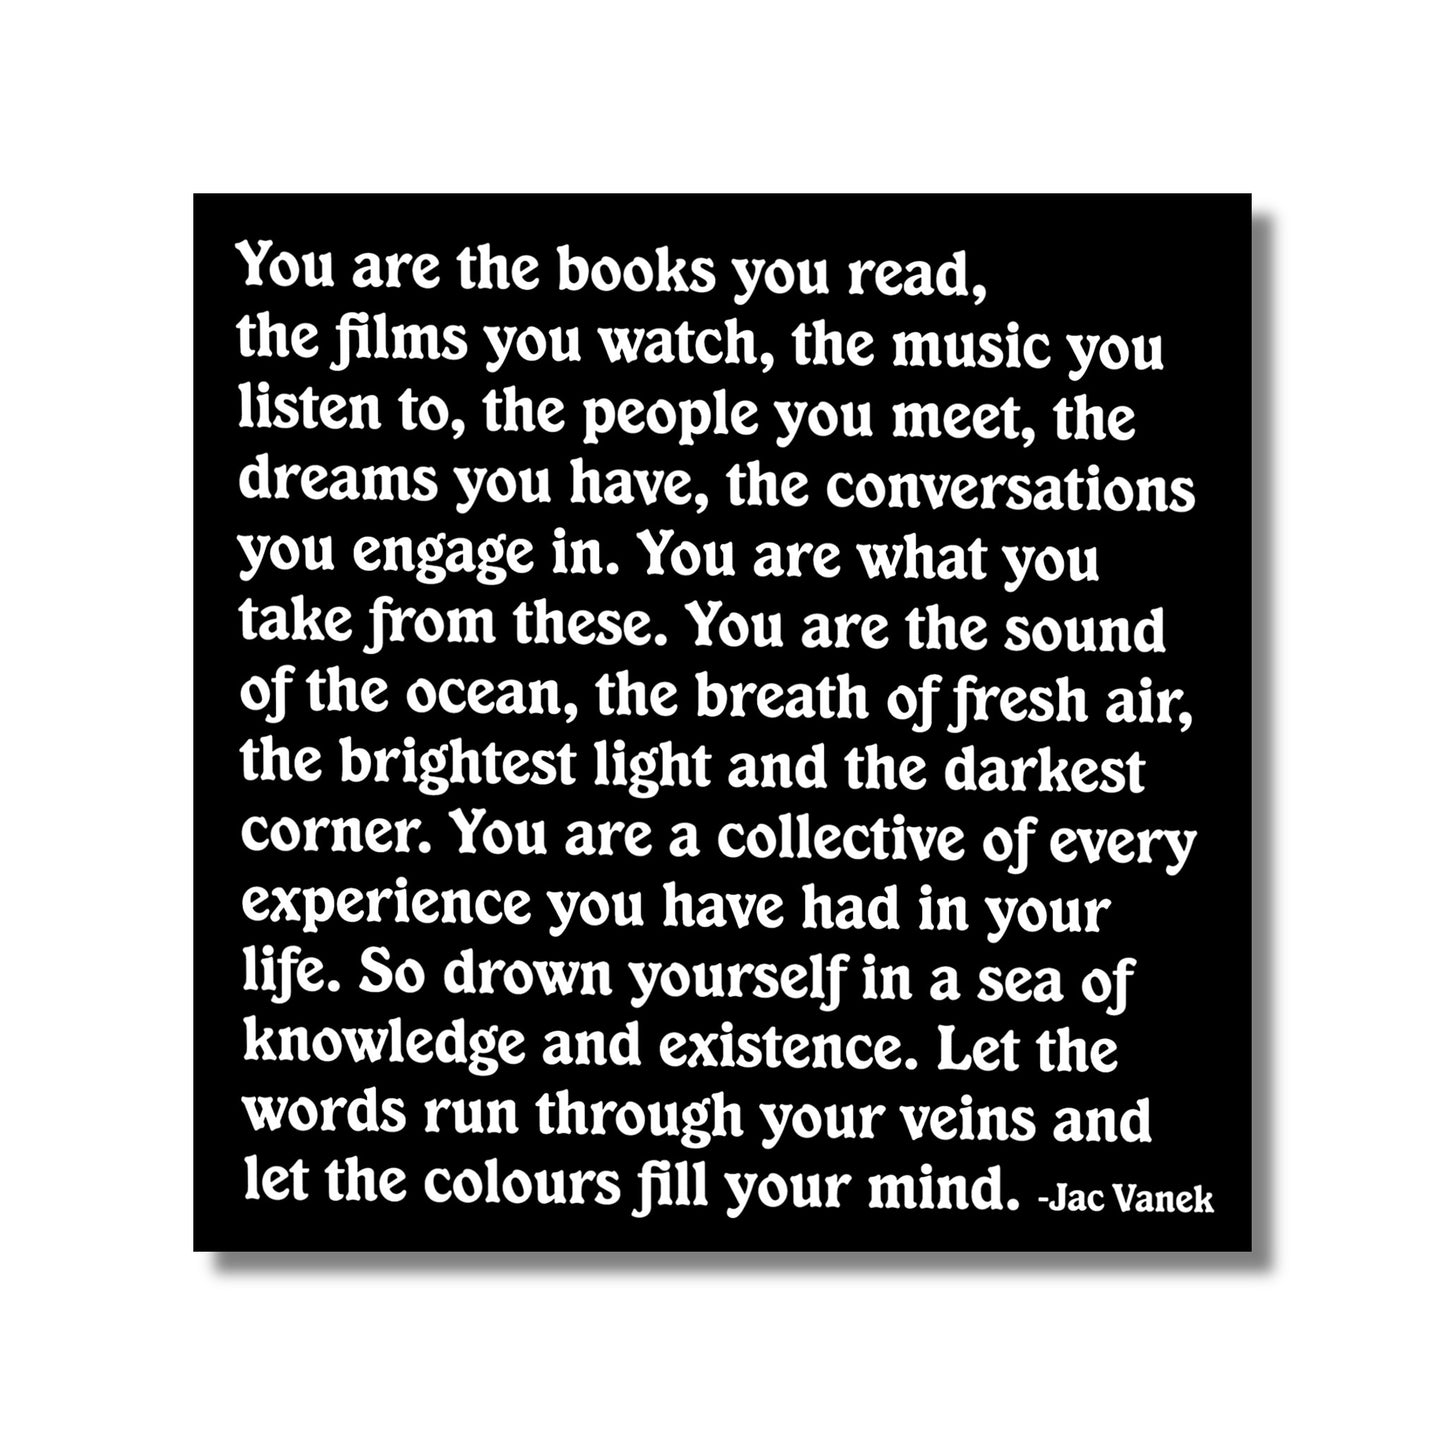 Inspiration Card — You are the books you read . . .